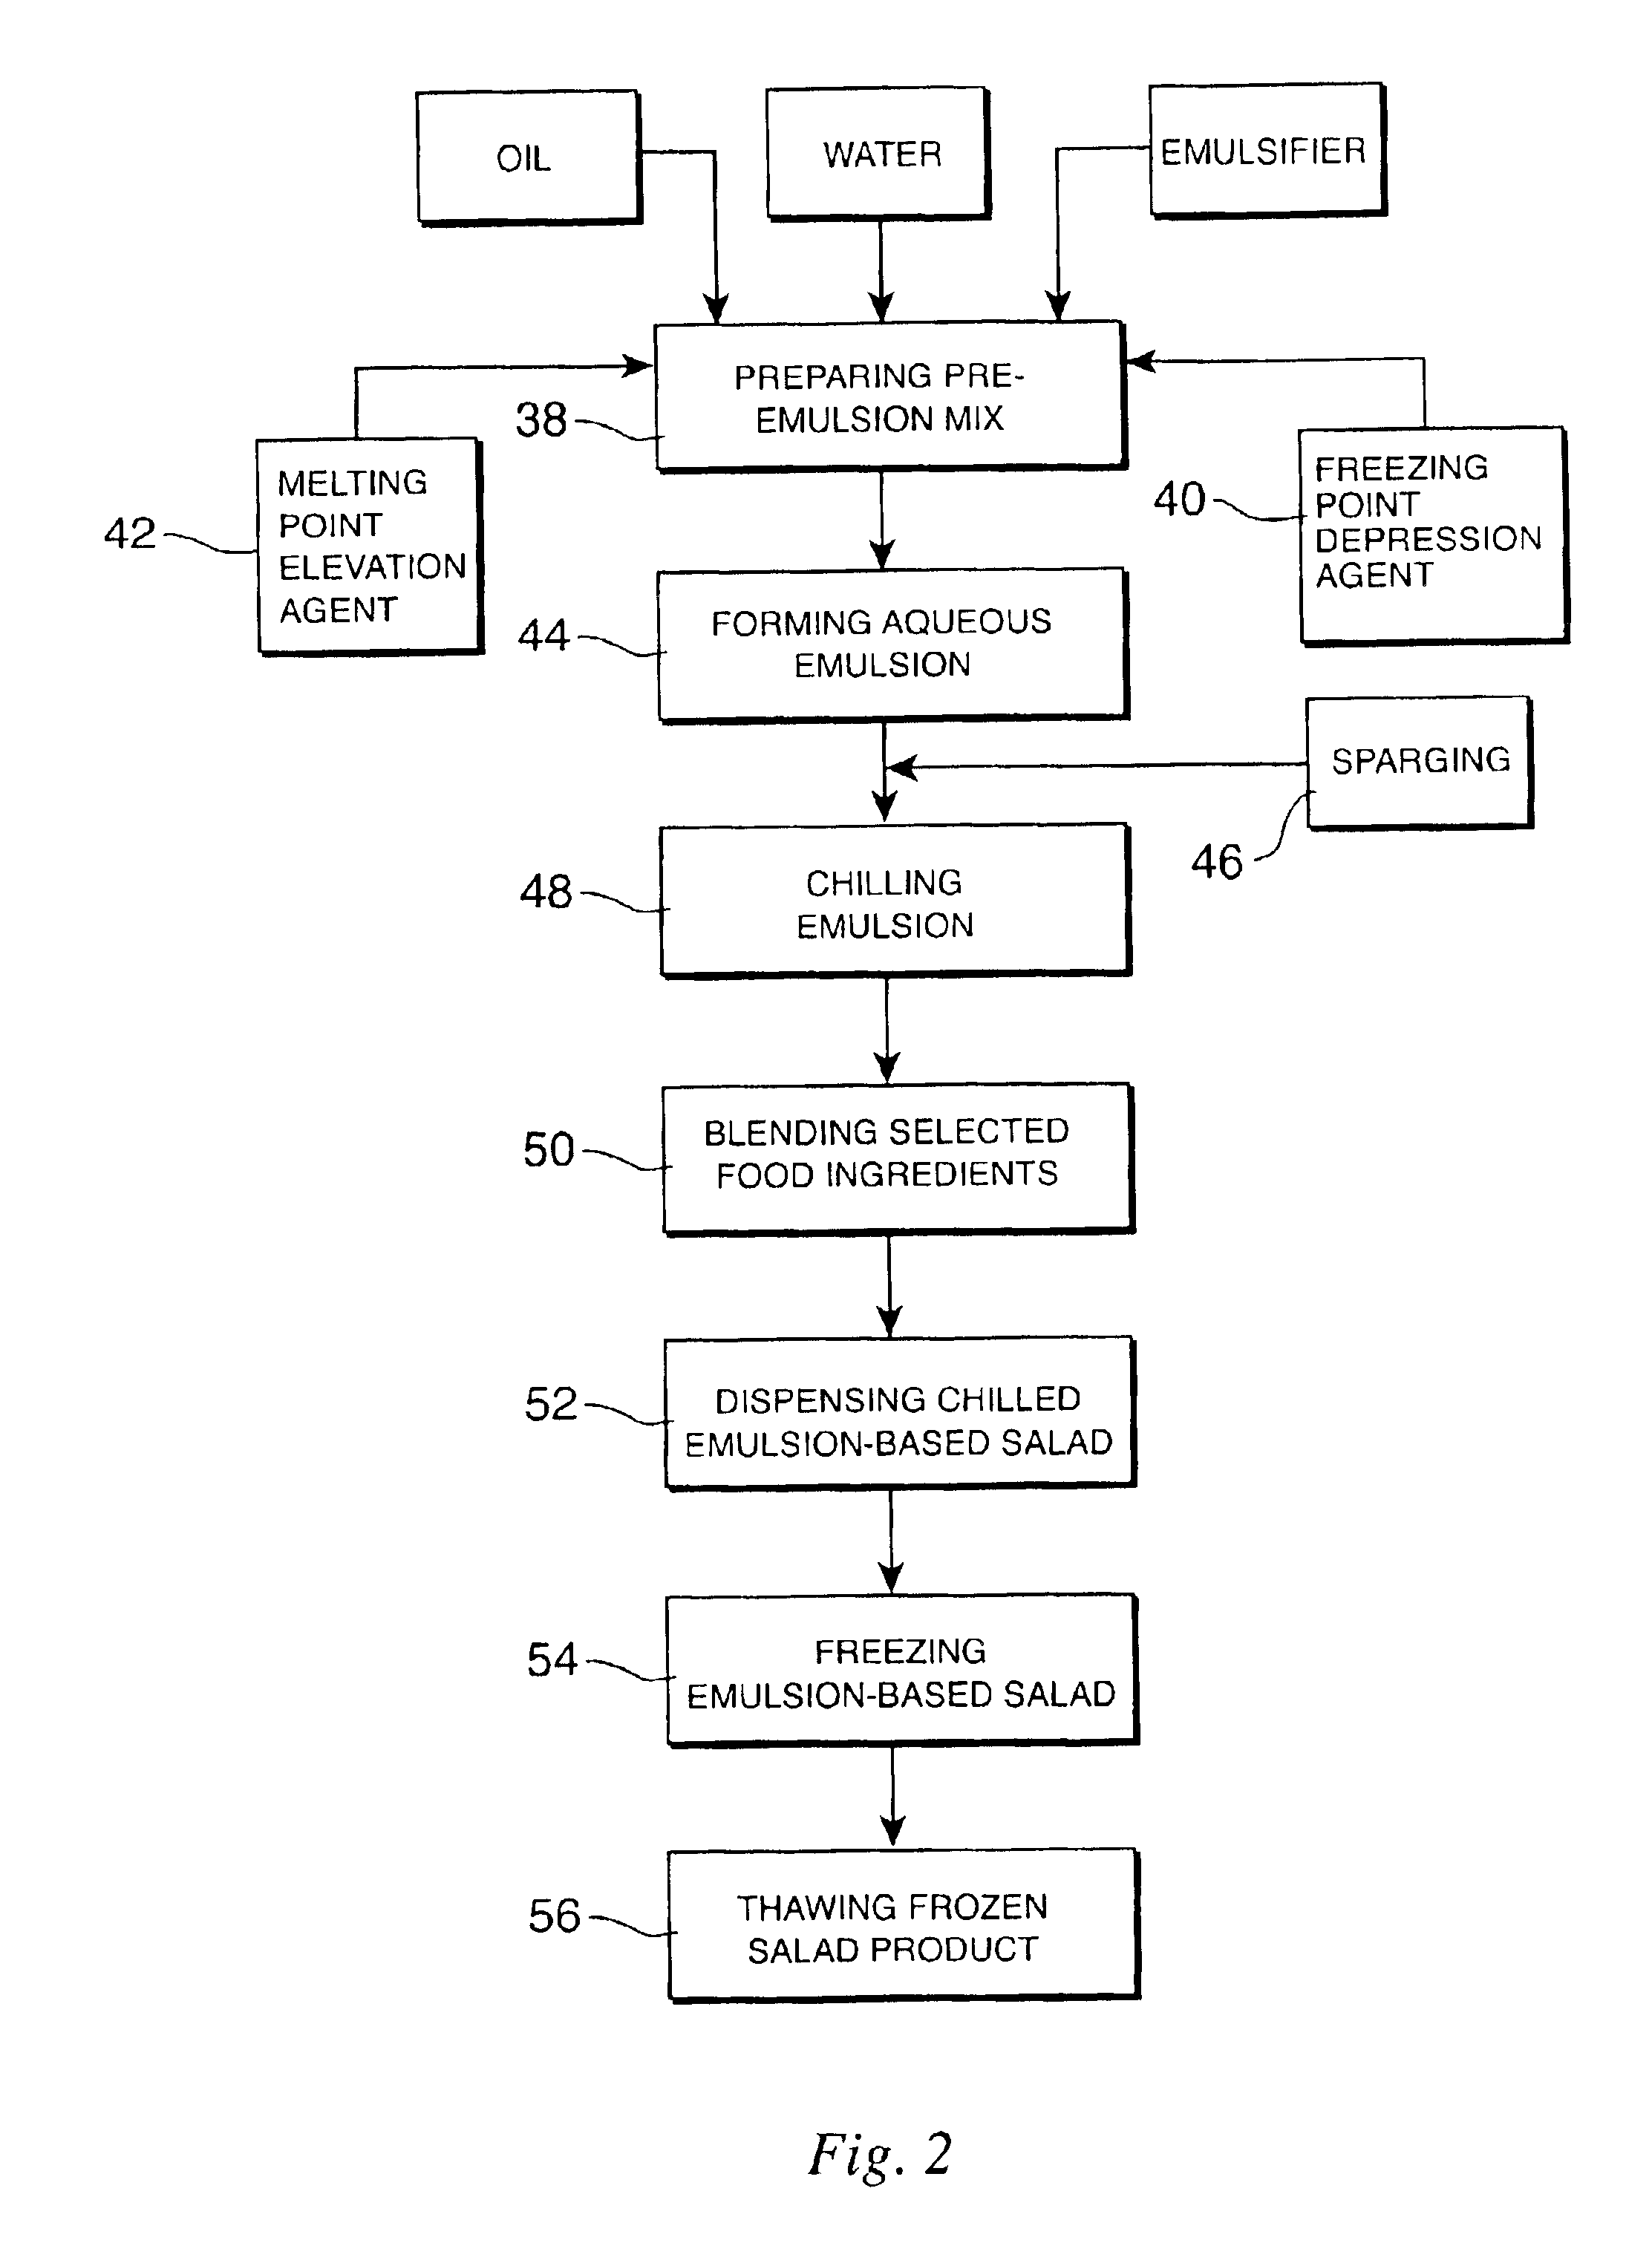 Process for preparing an emulsion based food salad having freeze-thaw stability